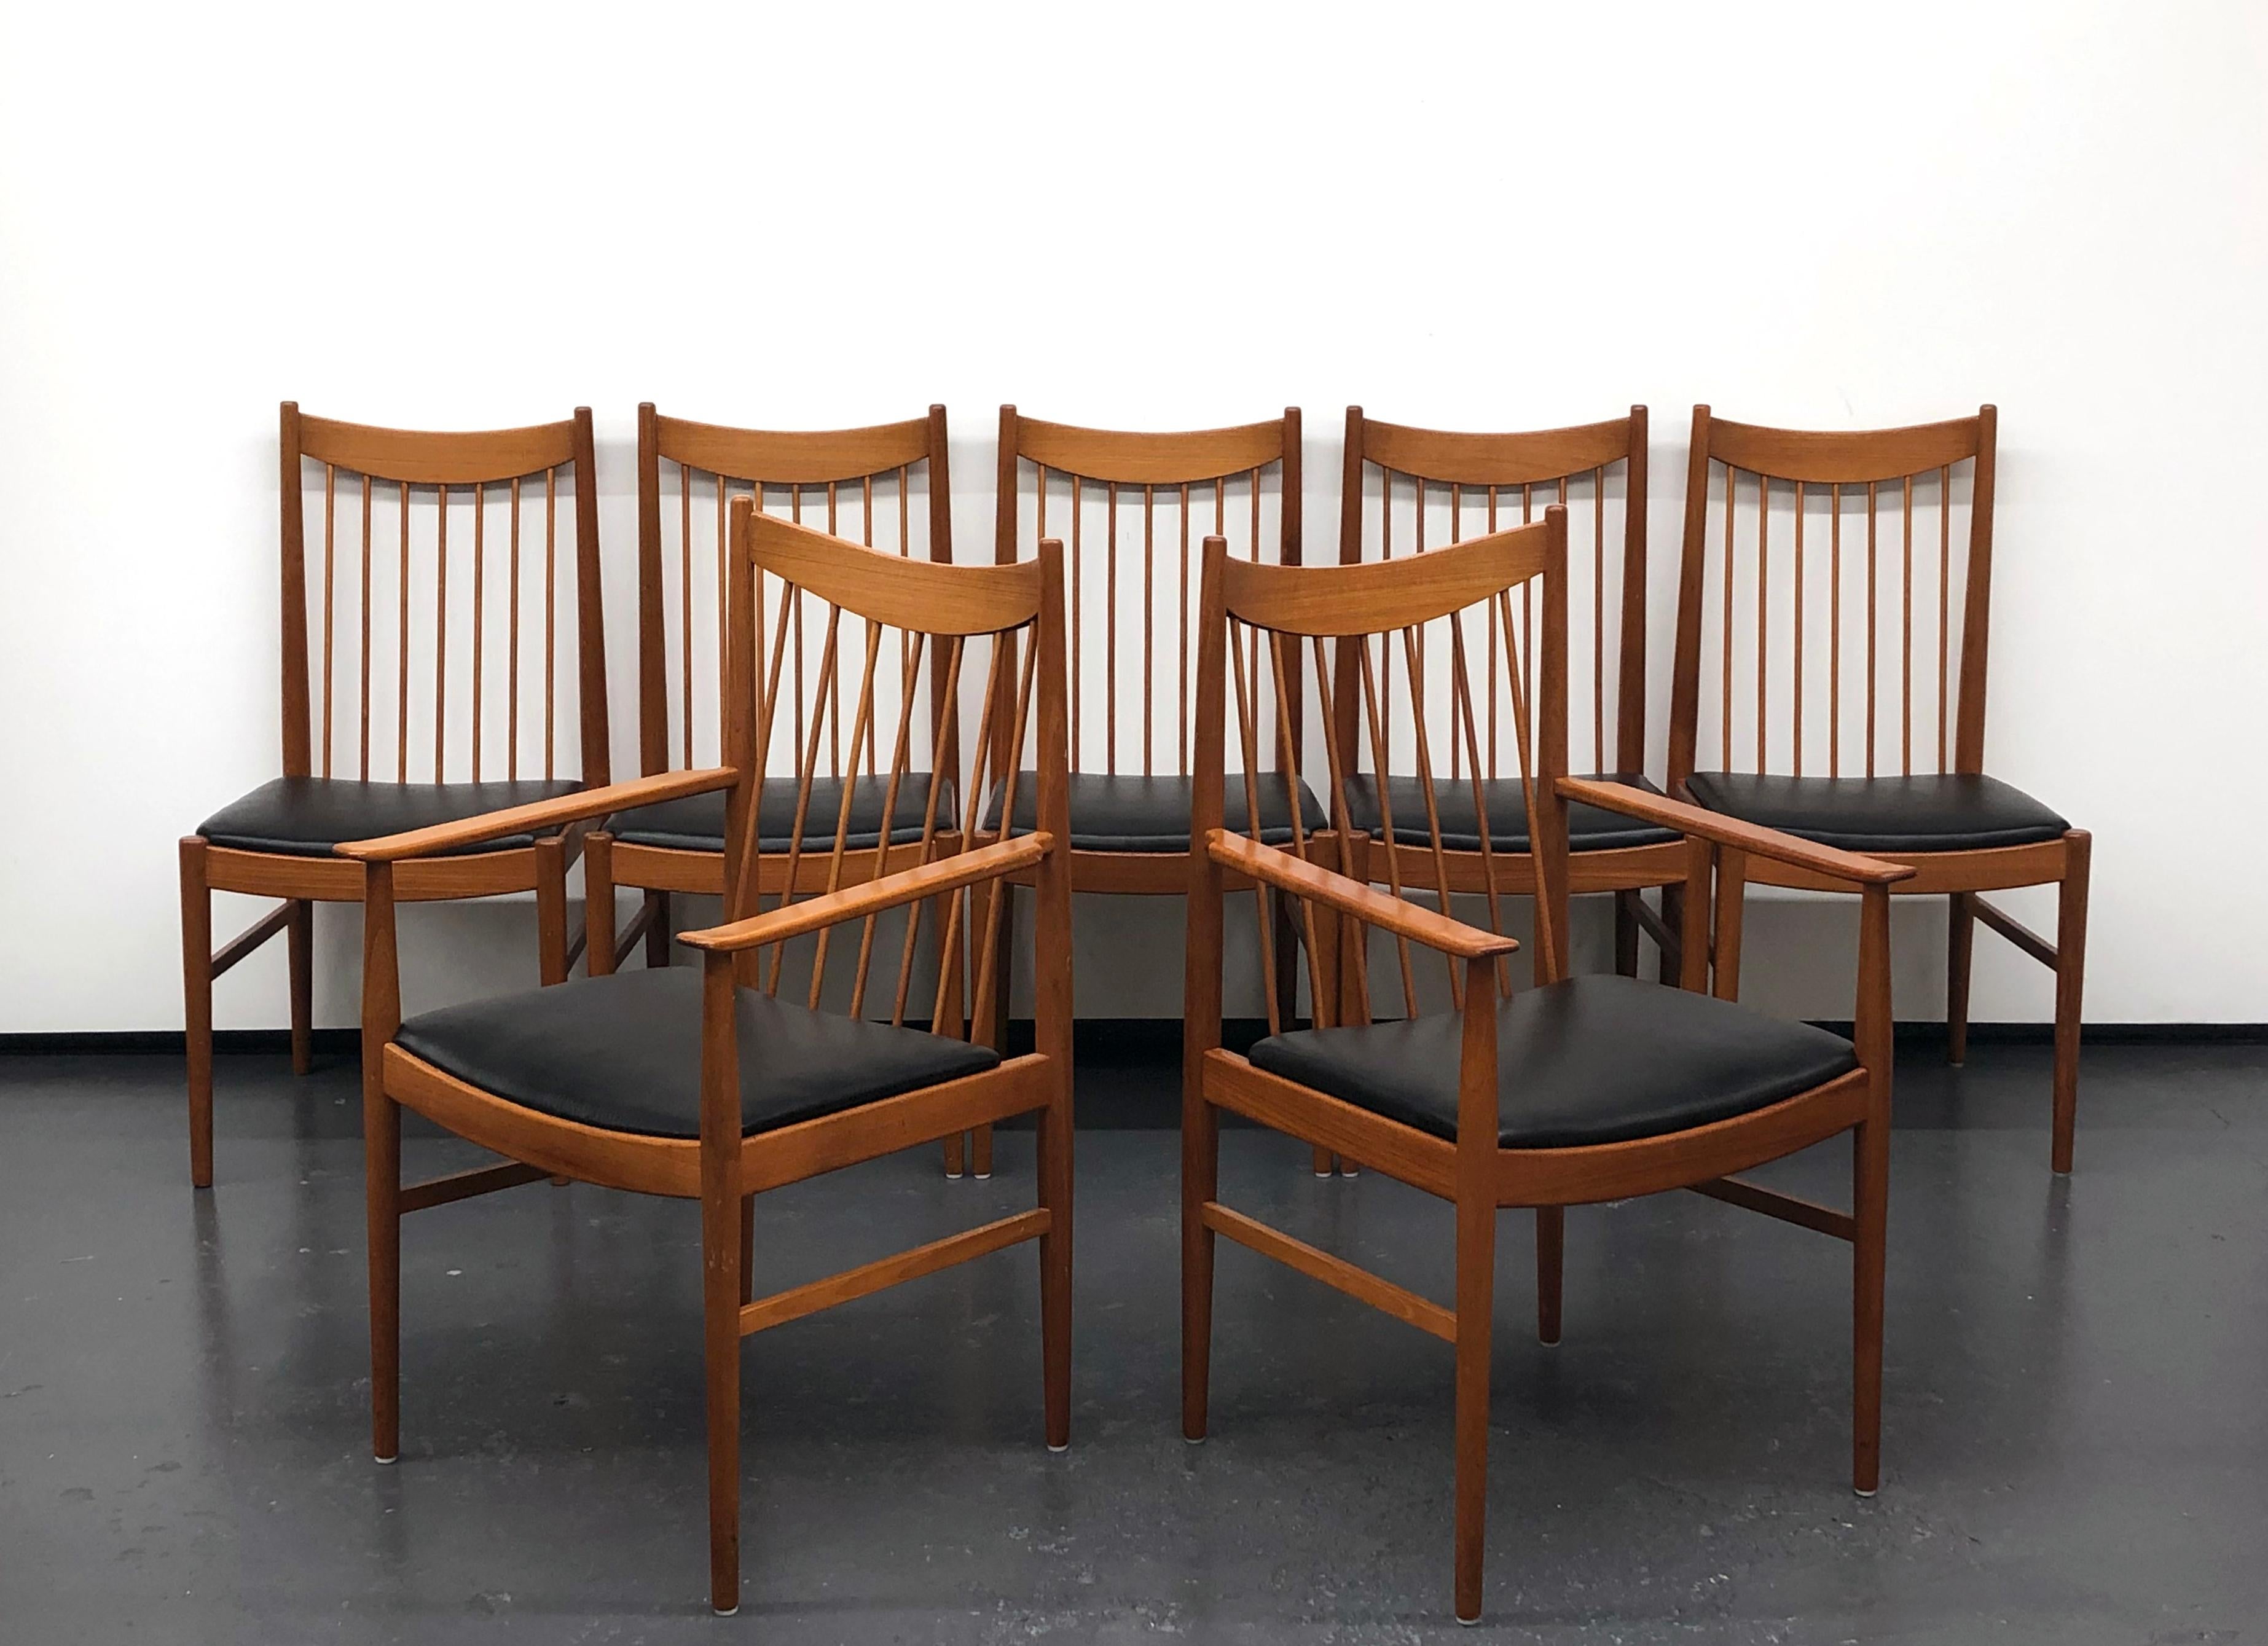 Beautiful set of seven dining chairs by Arne Vodder for Sibast, Denmark. Solid teak wood construction with original black vinyl seating. There are two arm chairs and five side chairs. Each chair is marked with the Sibast foil label.